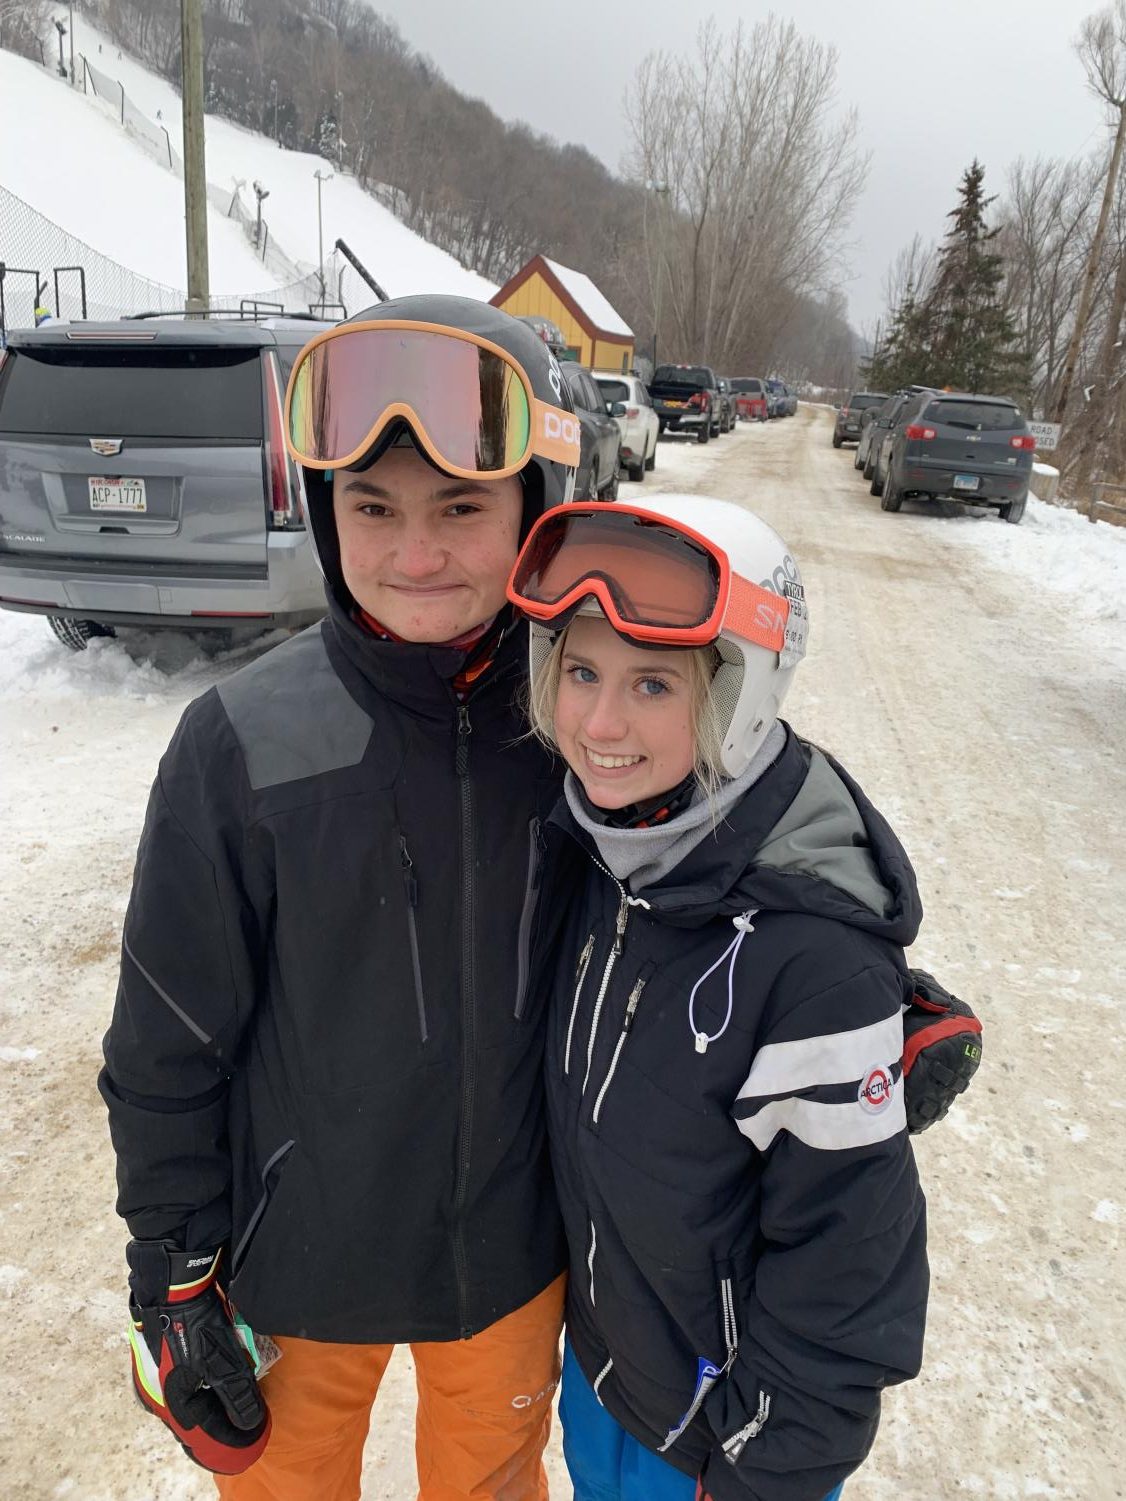  Scott Dodds ‘22 and Ava Miller ‘22 get together for a quick photo before heading off to the top of the mountain before their race.  